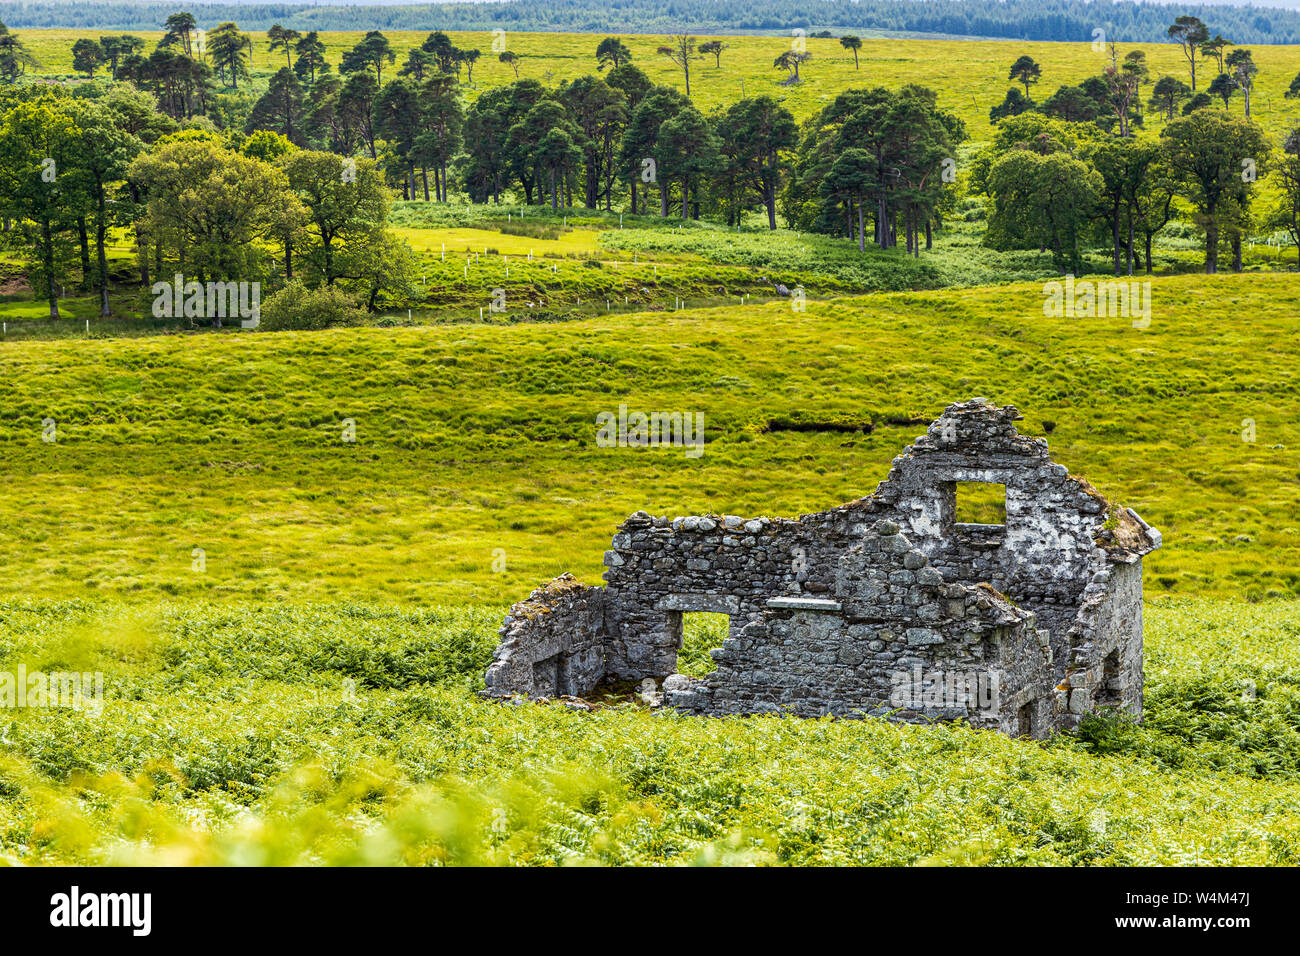 Ruins of an old stone built house in the Wicklow mountains near Sally Gap, Ireland Stock Photo